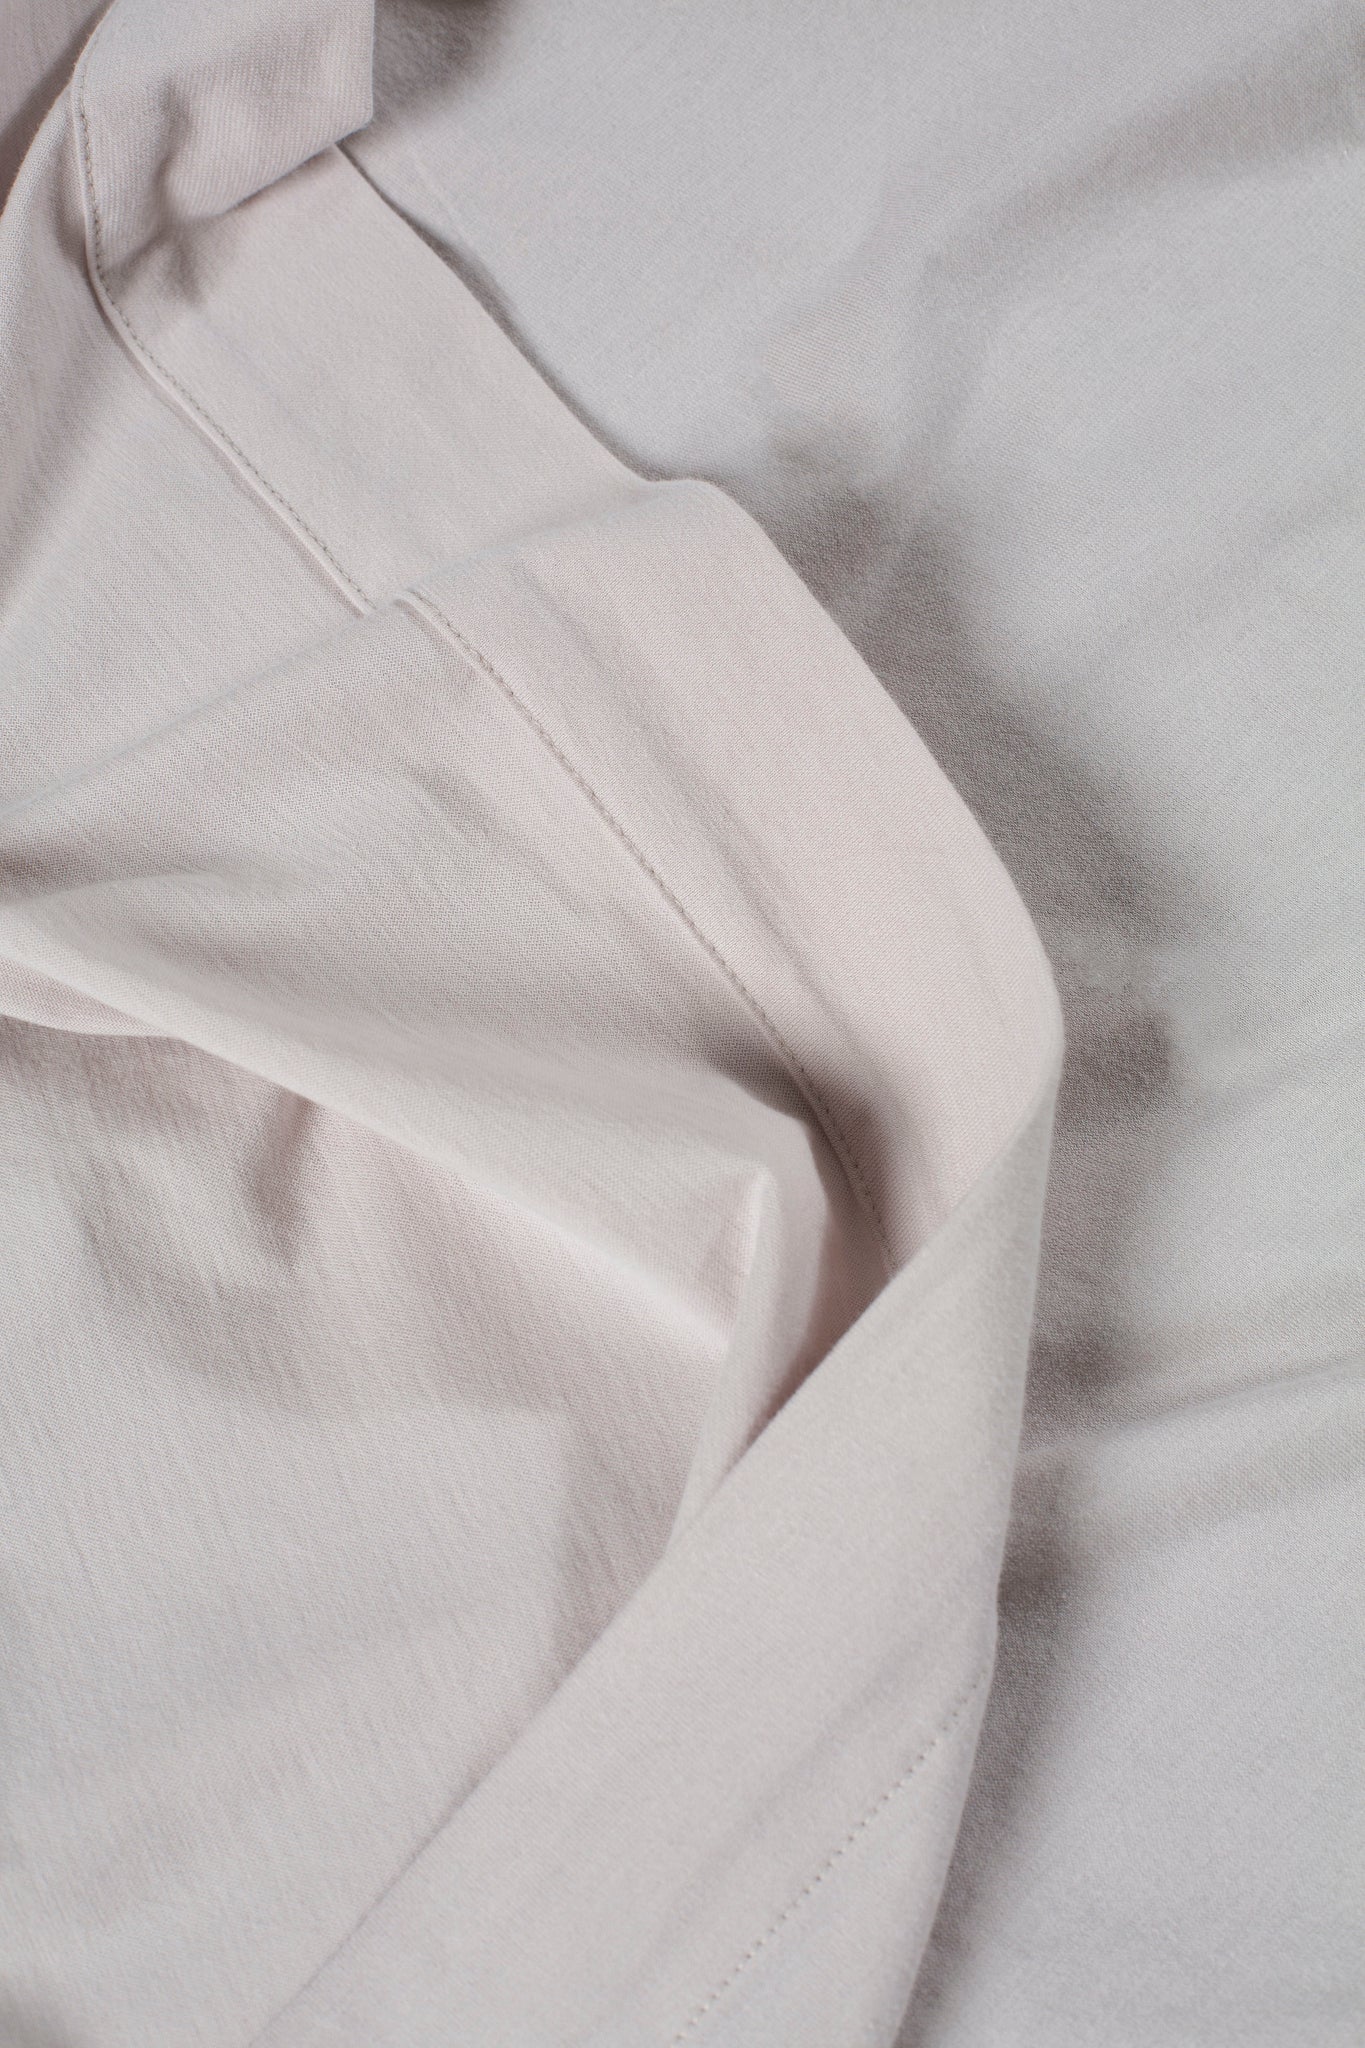 Fitted Sheet | Review Of Cotton Jersey Fitted Sheet | T-Shirt Sheets